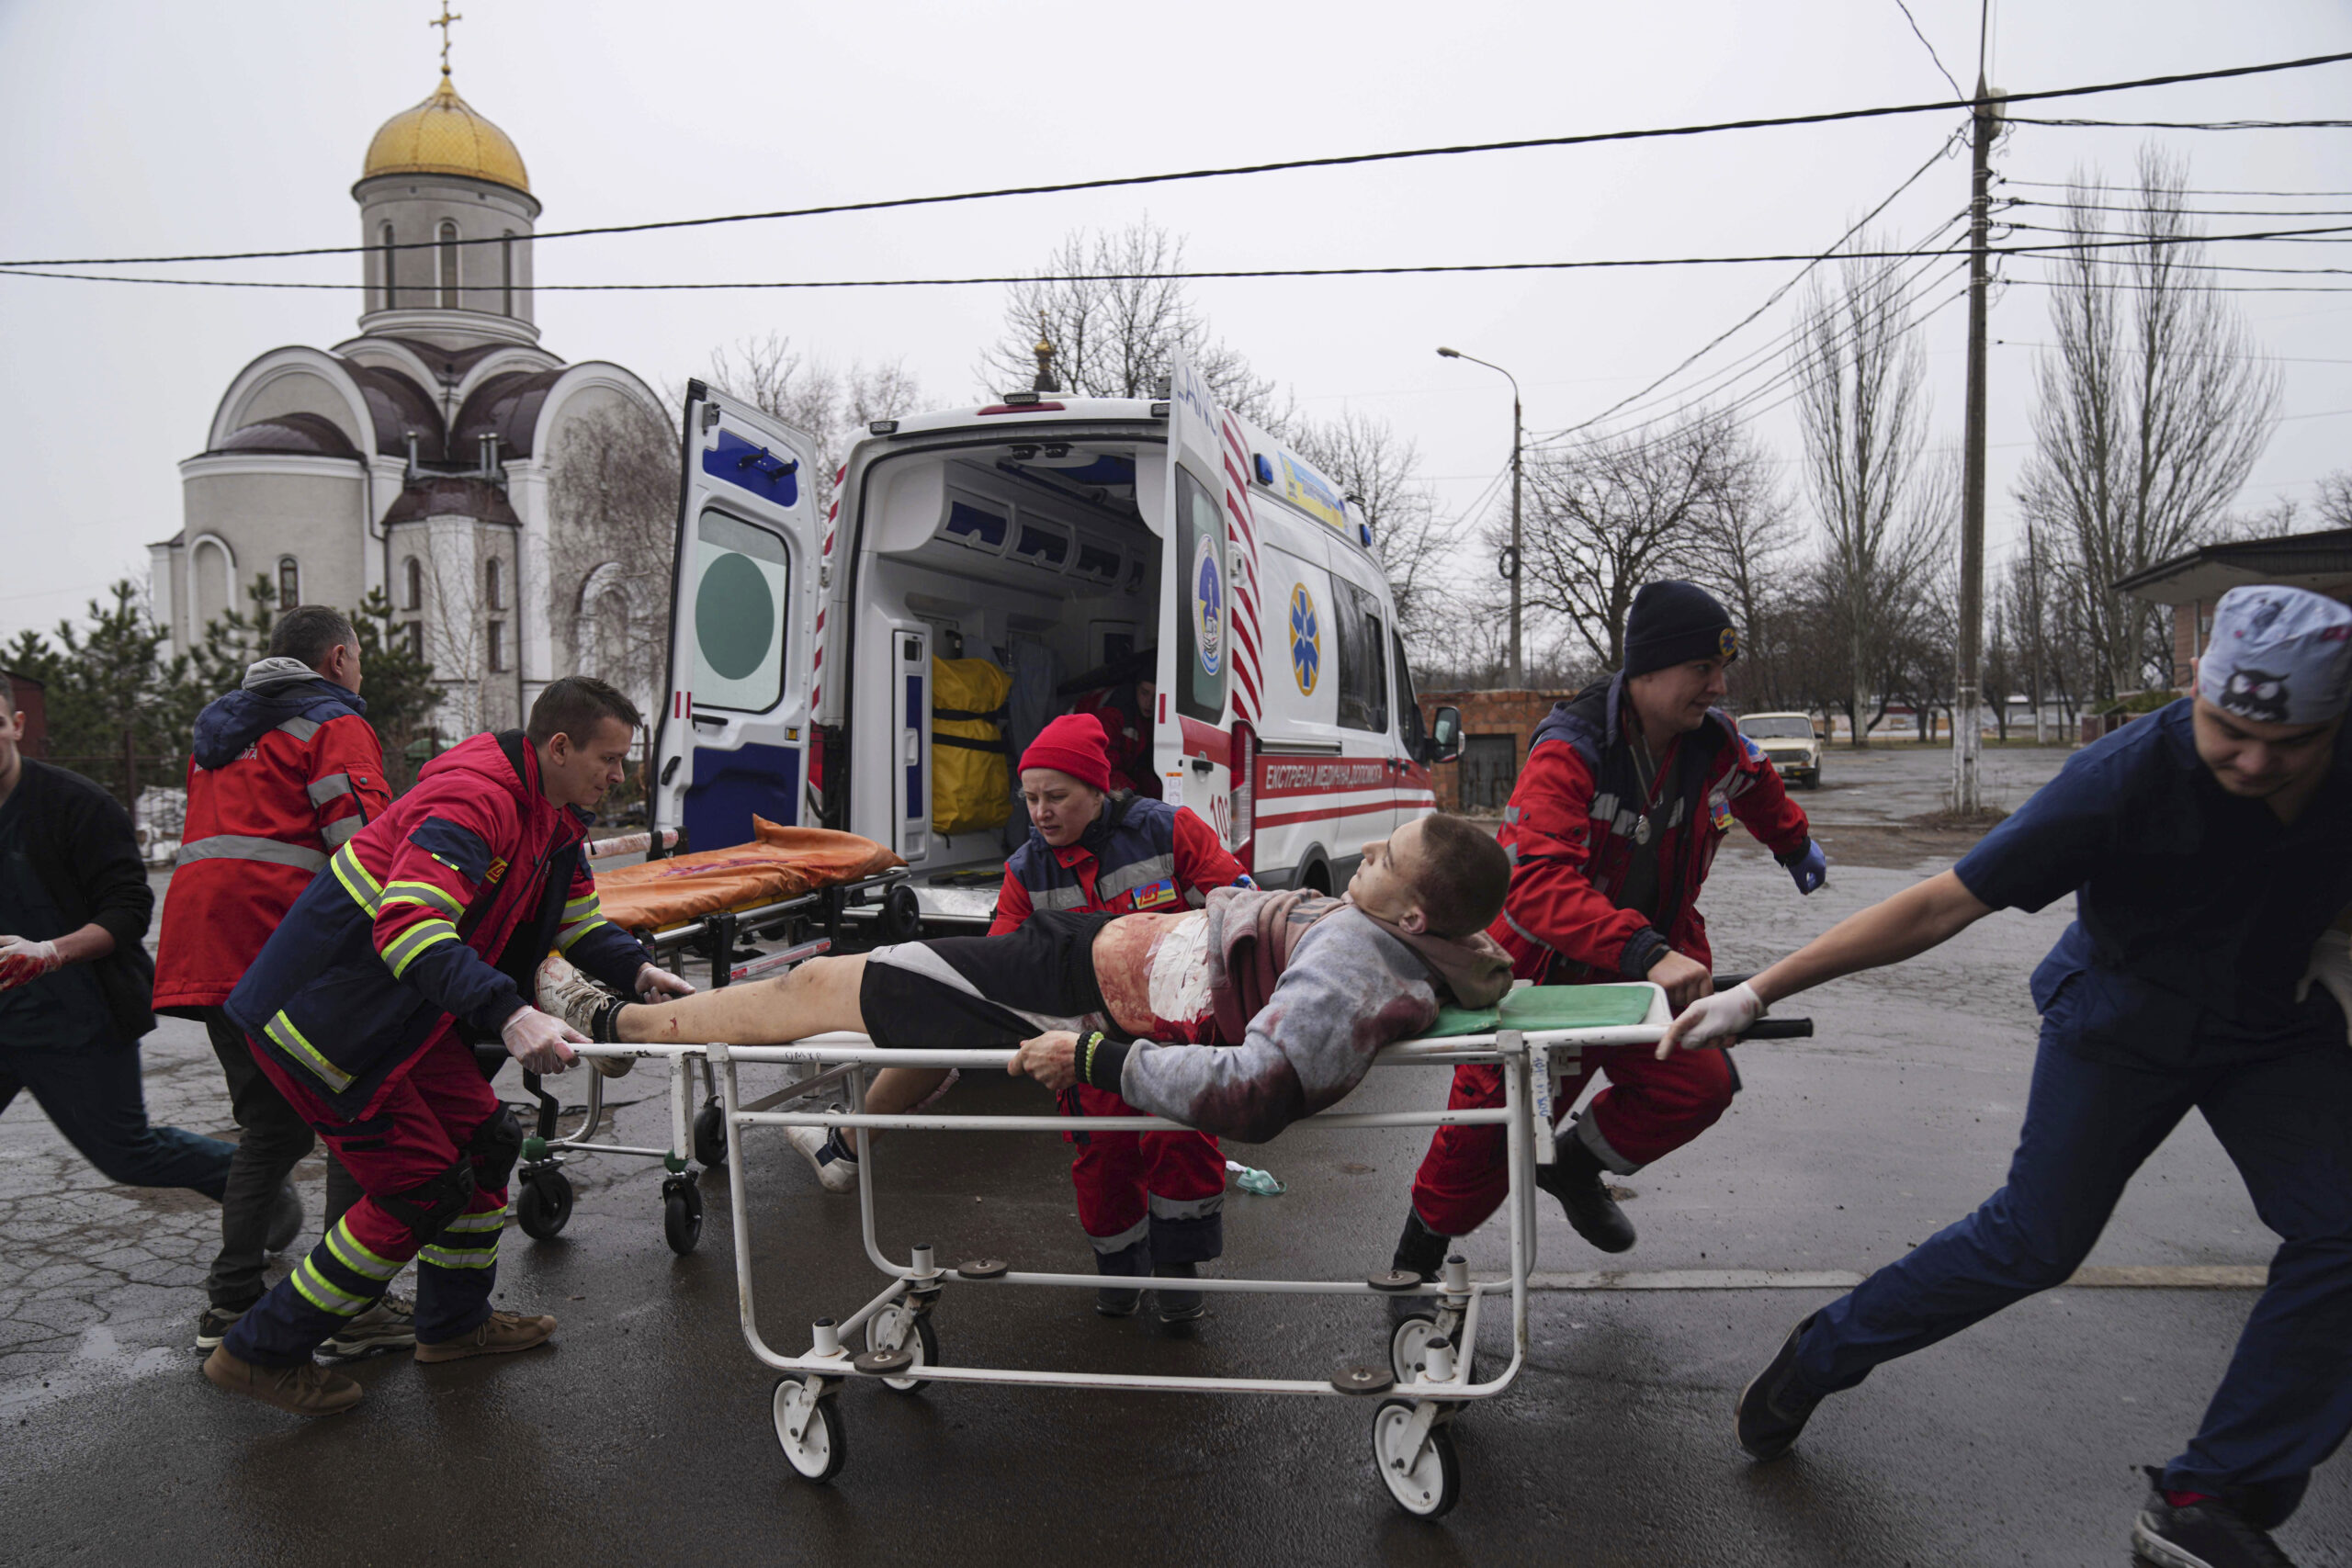 Ambulance paramedics move an injured man on a stretcher, wounded by shelling in a residential area, at the maternity hospital converted into a medical ward and used as a bomb shelter in Mariupol, Ukraine, Tuesday, March 1, 2022. Russian strikes on the key southern port city of Mariupol seriously wounded several people. (AP Photo/Evgeniy Maloletka)